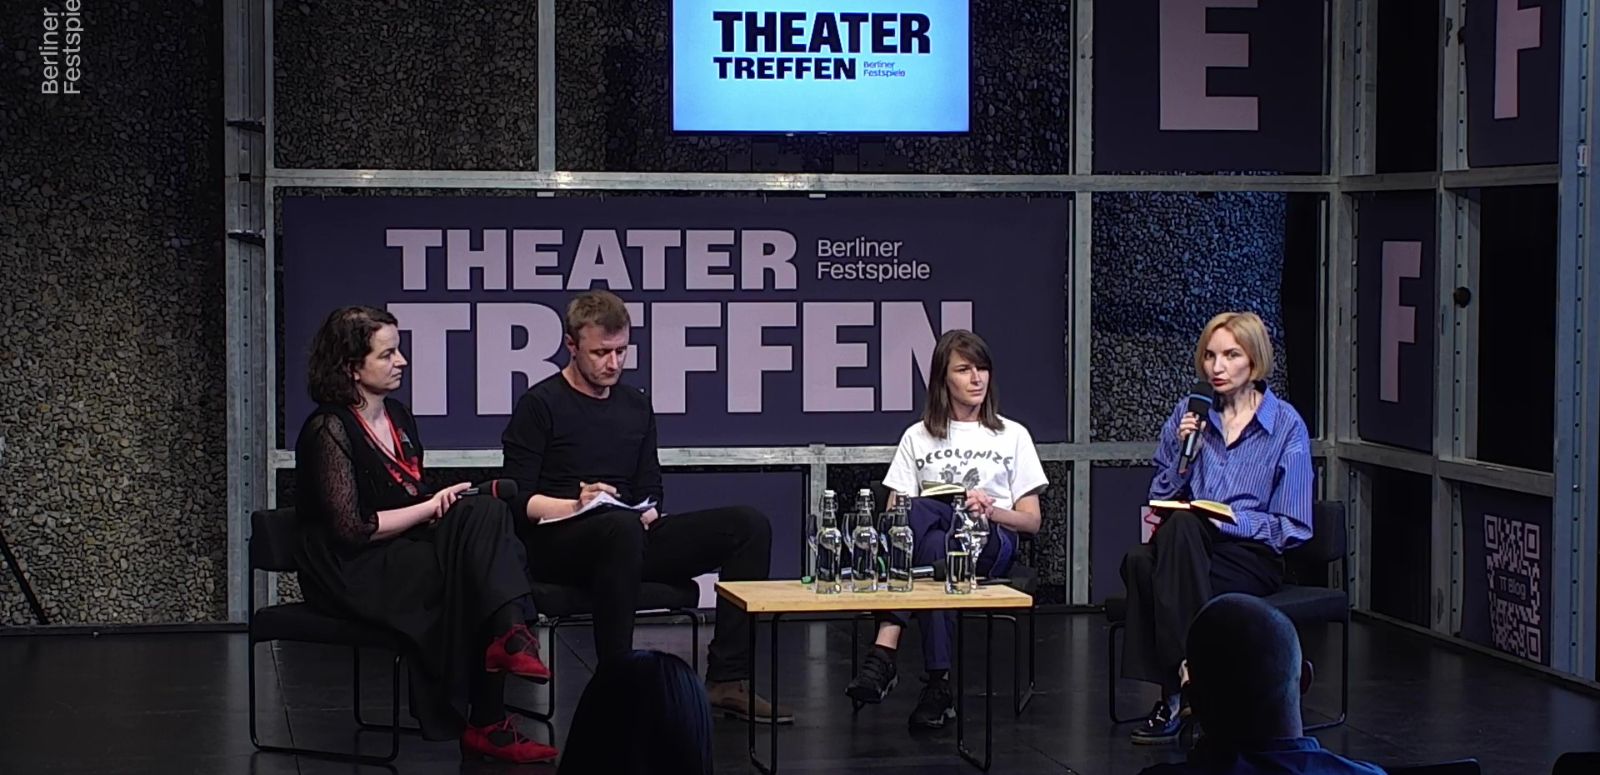 Three women and a man are sitting around a small table, behind them the lettering Theatertreffen. The woman on the far right has a microphone in her hand.